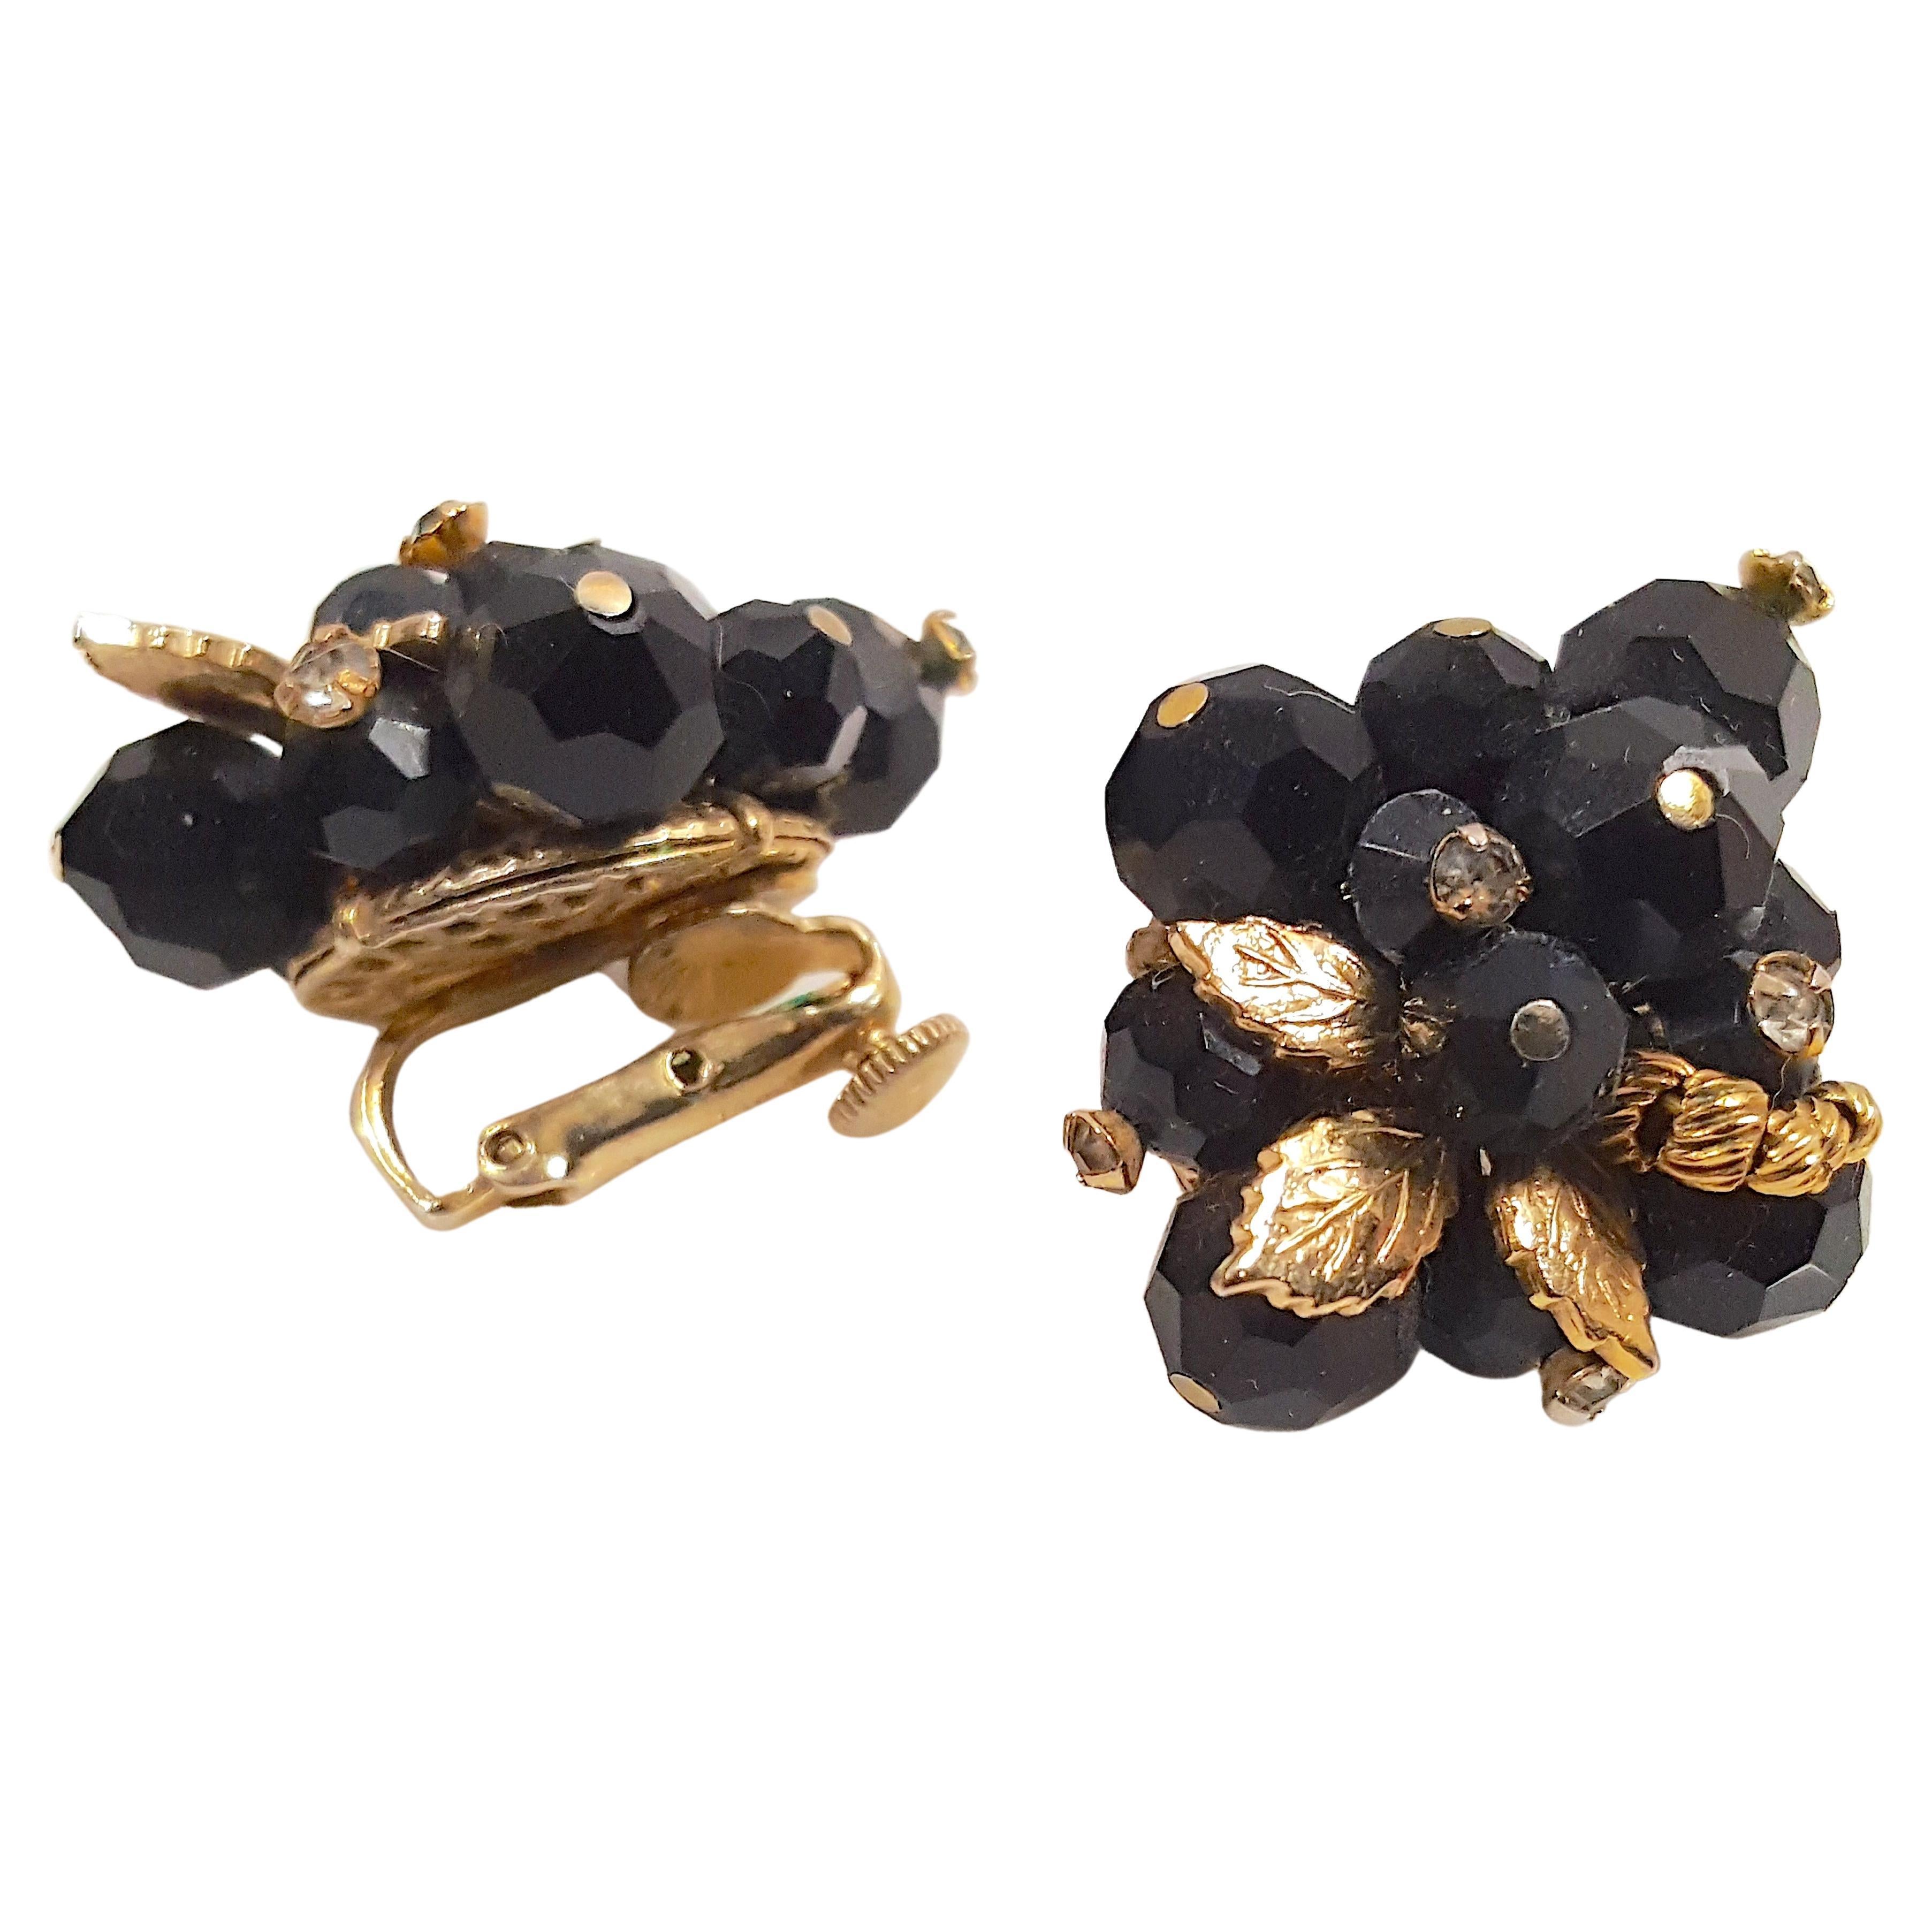 These post-WWII high-end Vendome hand-wired clip earrings each feature a spray of yellow-gold gilt-metal leaves with a stylized branch and five prong-set clear crystals among a cluster of faceted black glass beads. When worn on the ear, they are